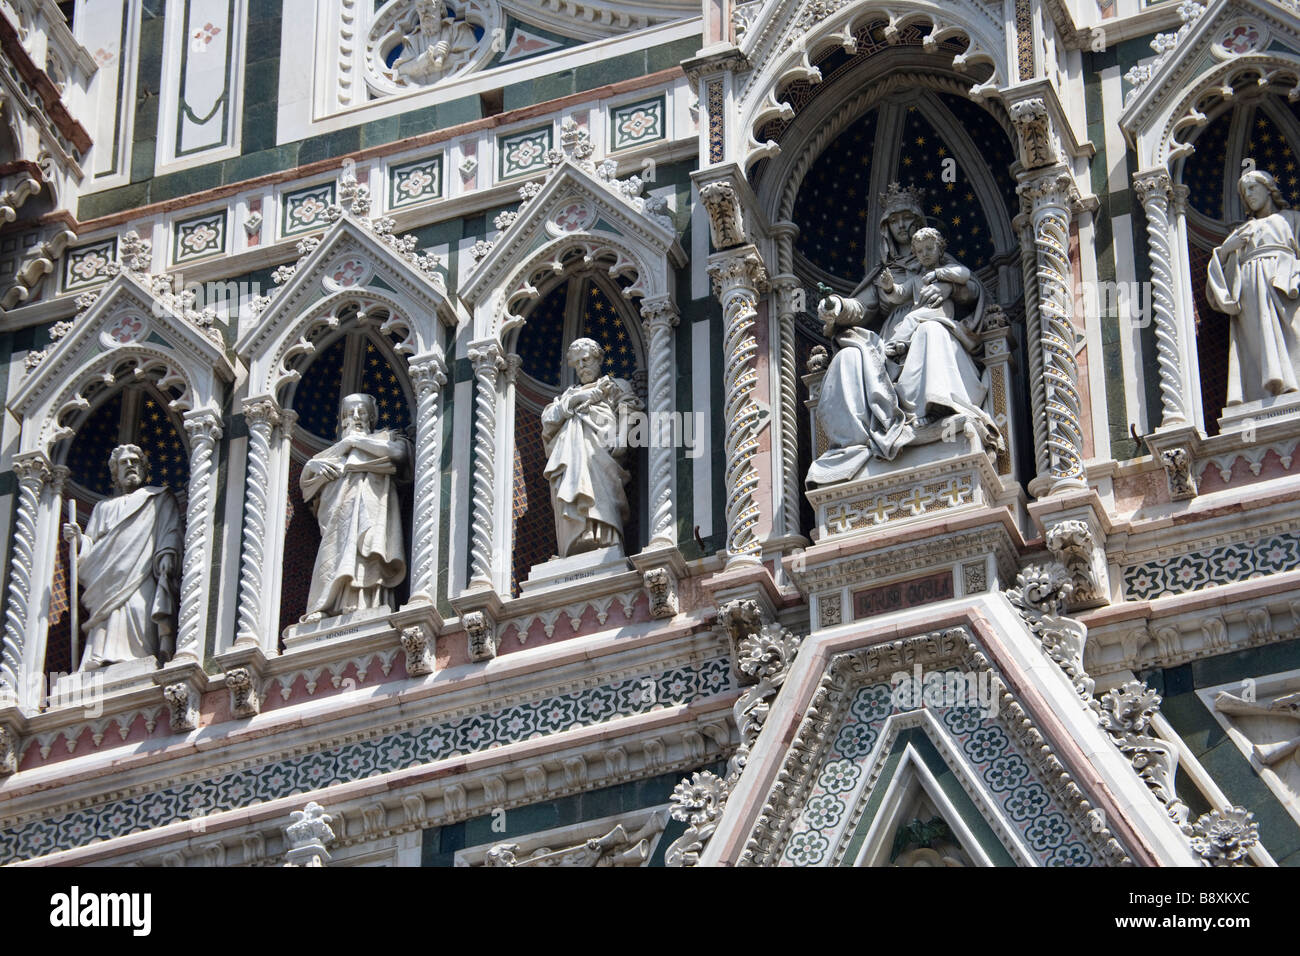 Statues on the facade of the Duomo (cathedral) in the Piazza del Duomo, Florence, Tuscany, Italy. Stock Photo